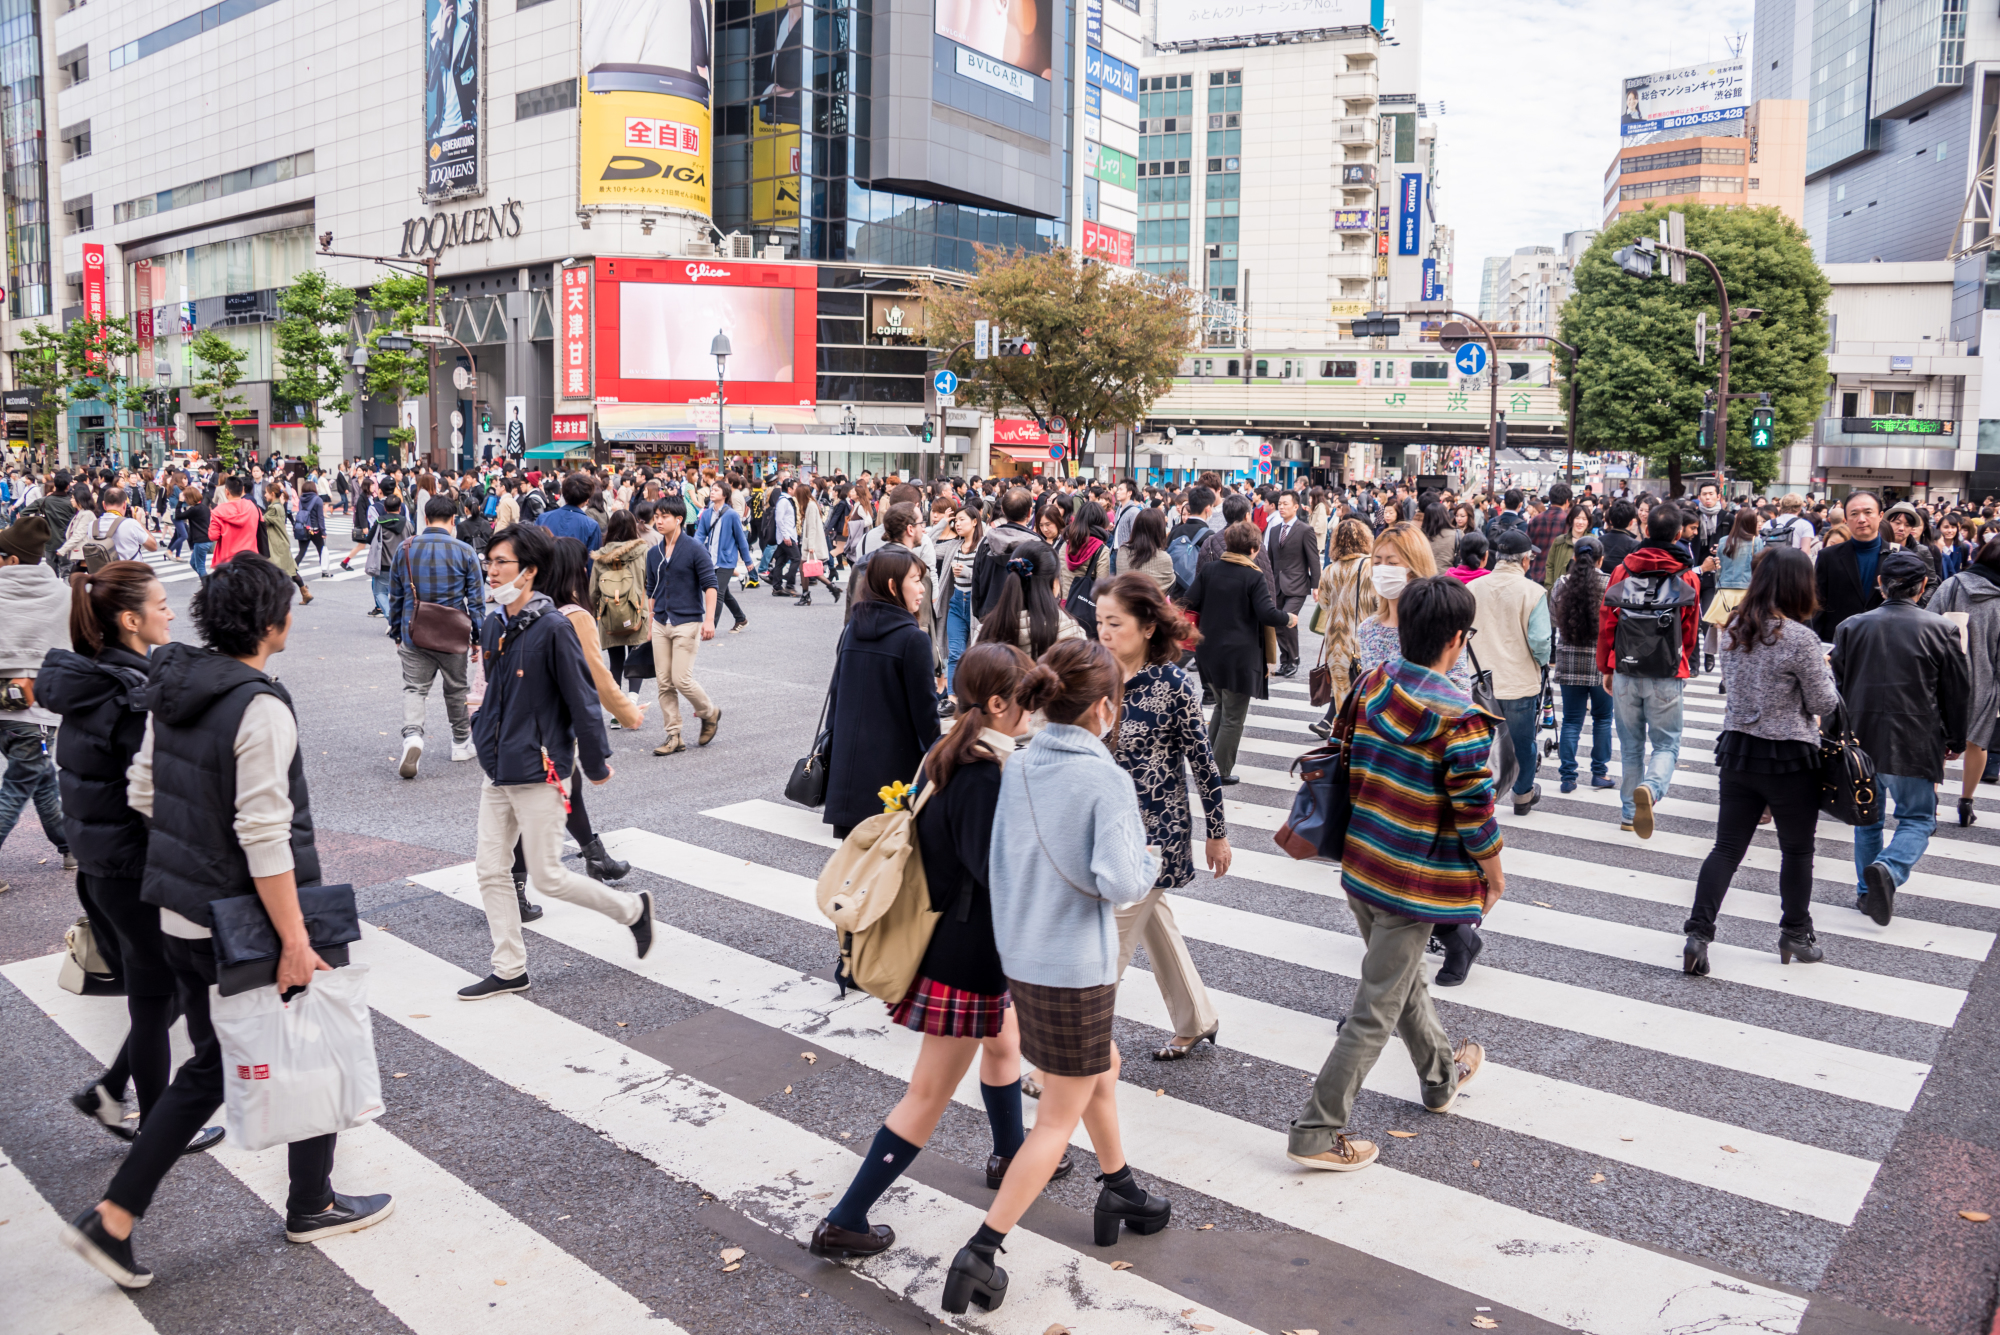 Young Japanese today prefer security and show little of the 'animal spirit' needed to help realize Prime Minister Shinzo Abe's vision of a 'great entrepreneurial nation,' experts say. | ISTOCK